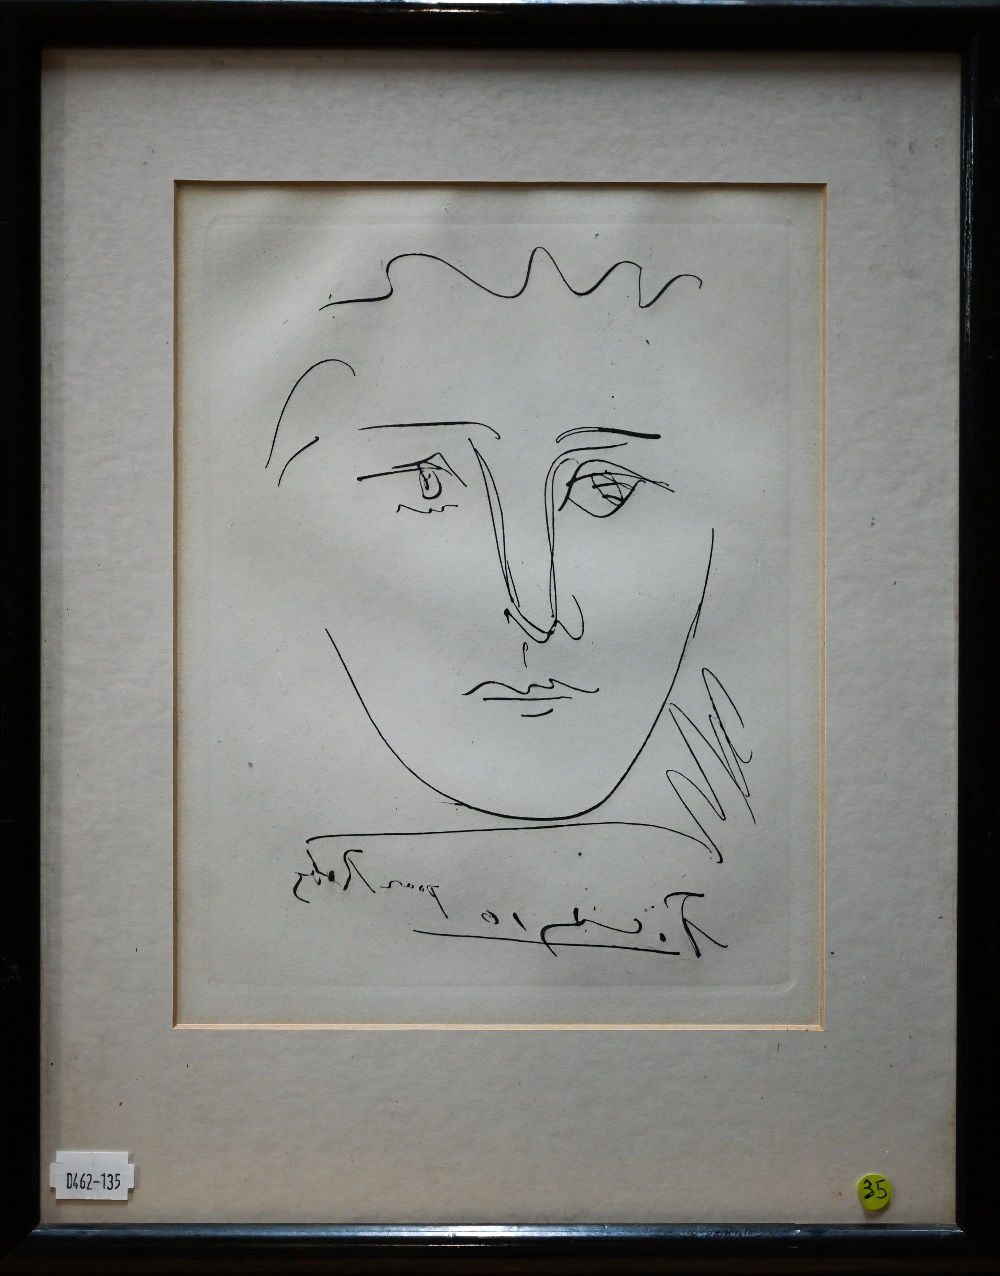 Pablo Picasso (1881-1973), 'Pour Robie', etching, signed in the plate, 24 x 19 cm